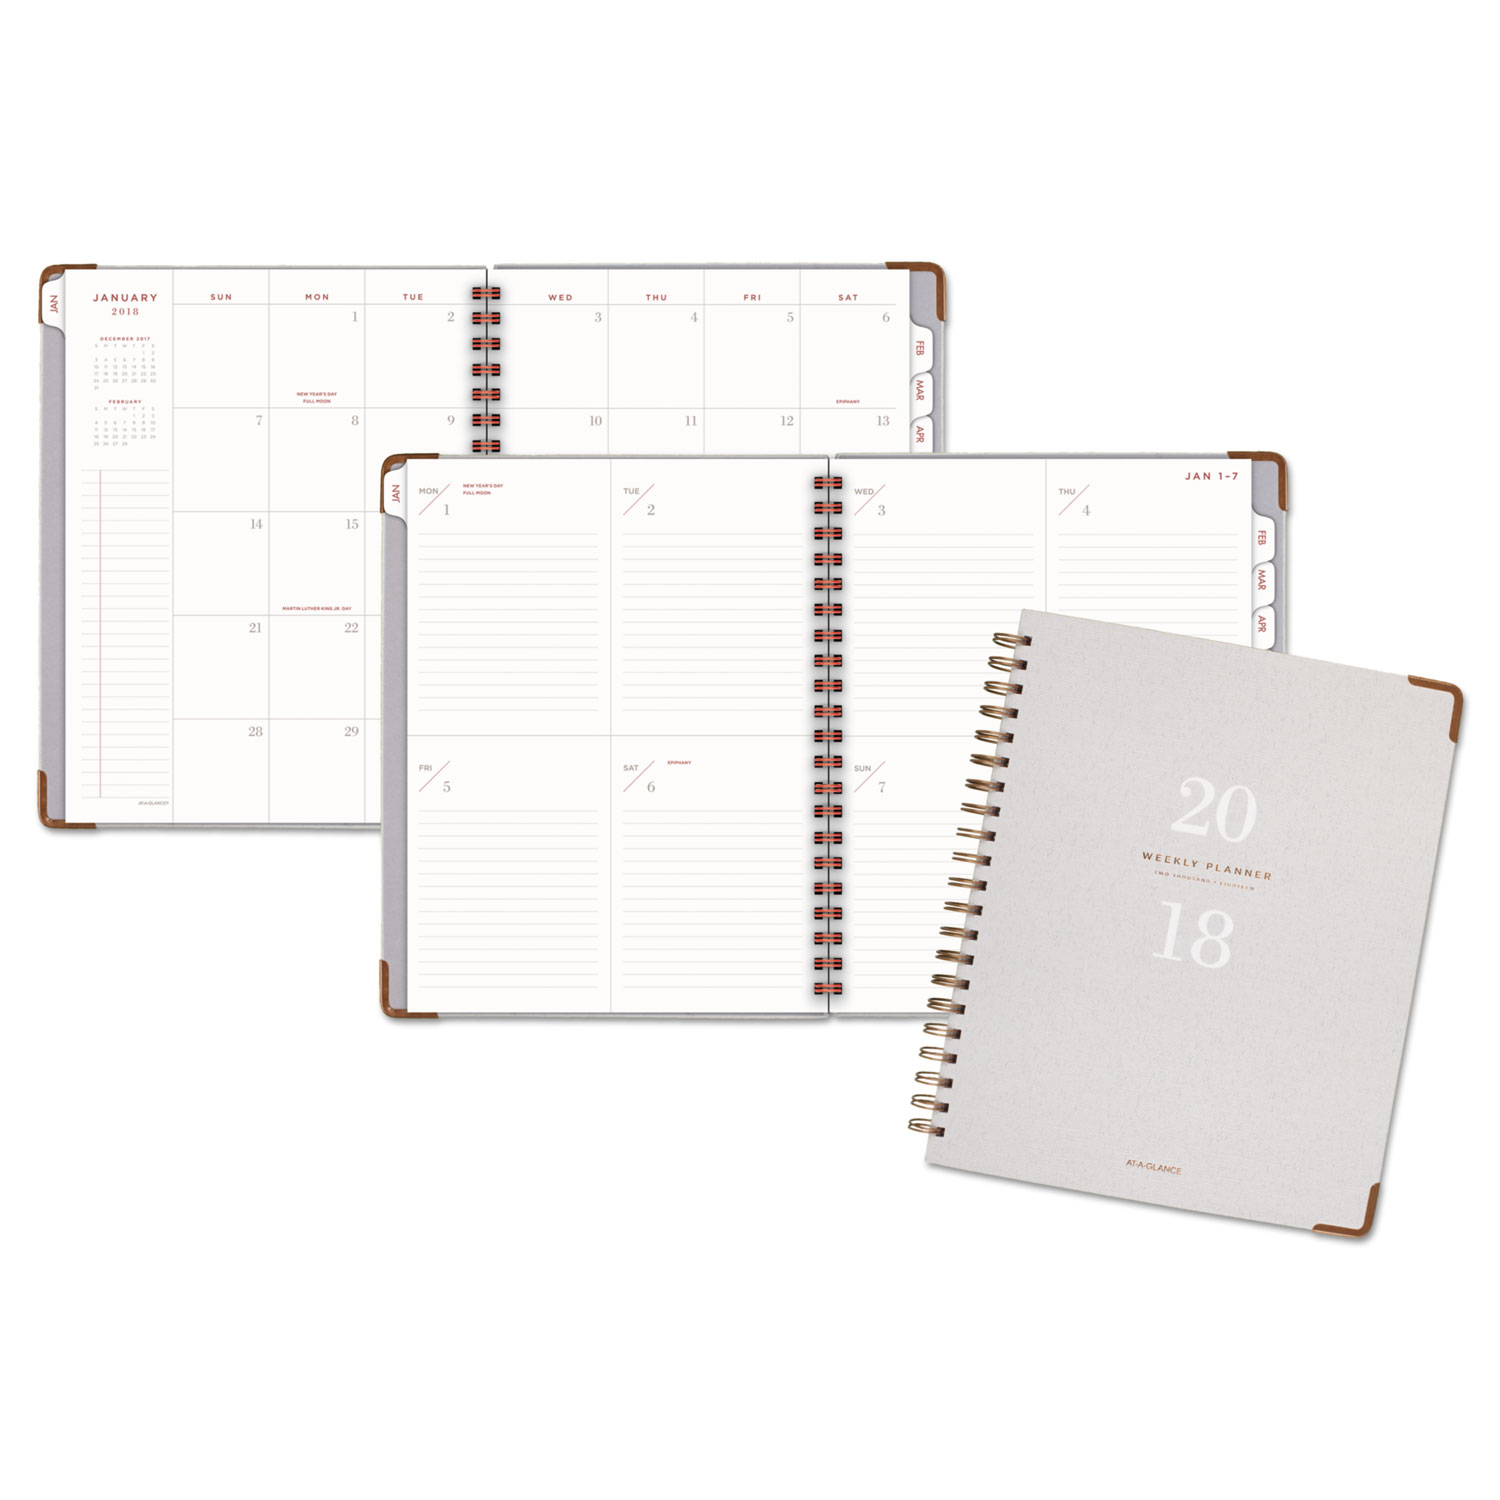 Light Gray Wirebound Weekly/Monthly Planners, 8 3/8 x 11, Gray, 2018